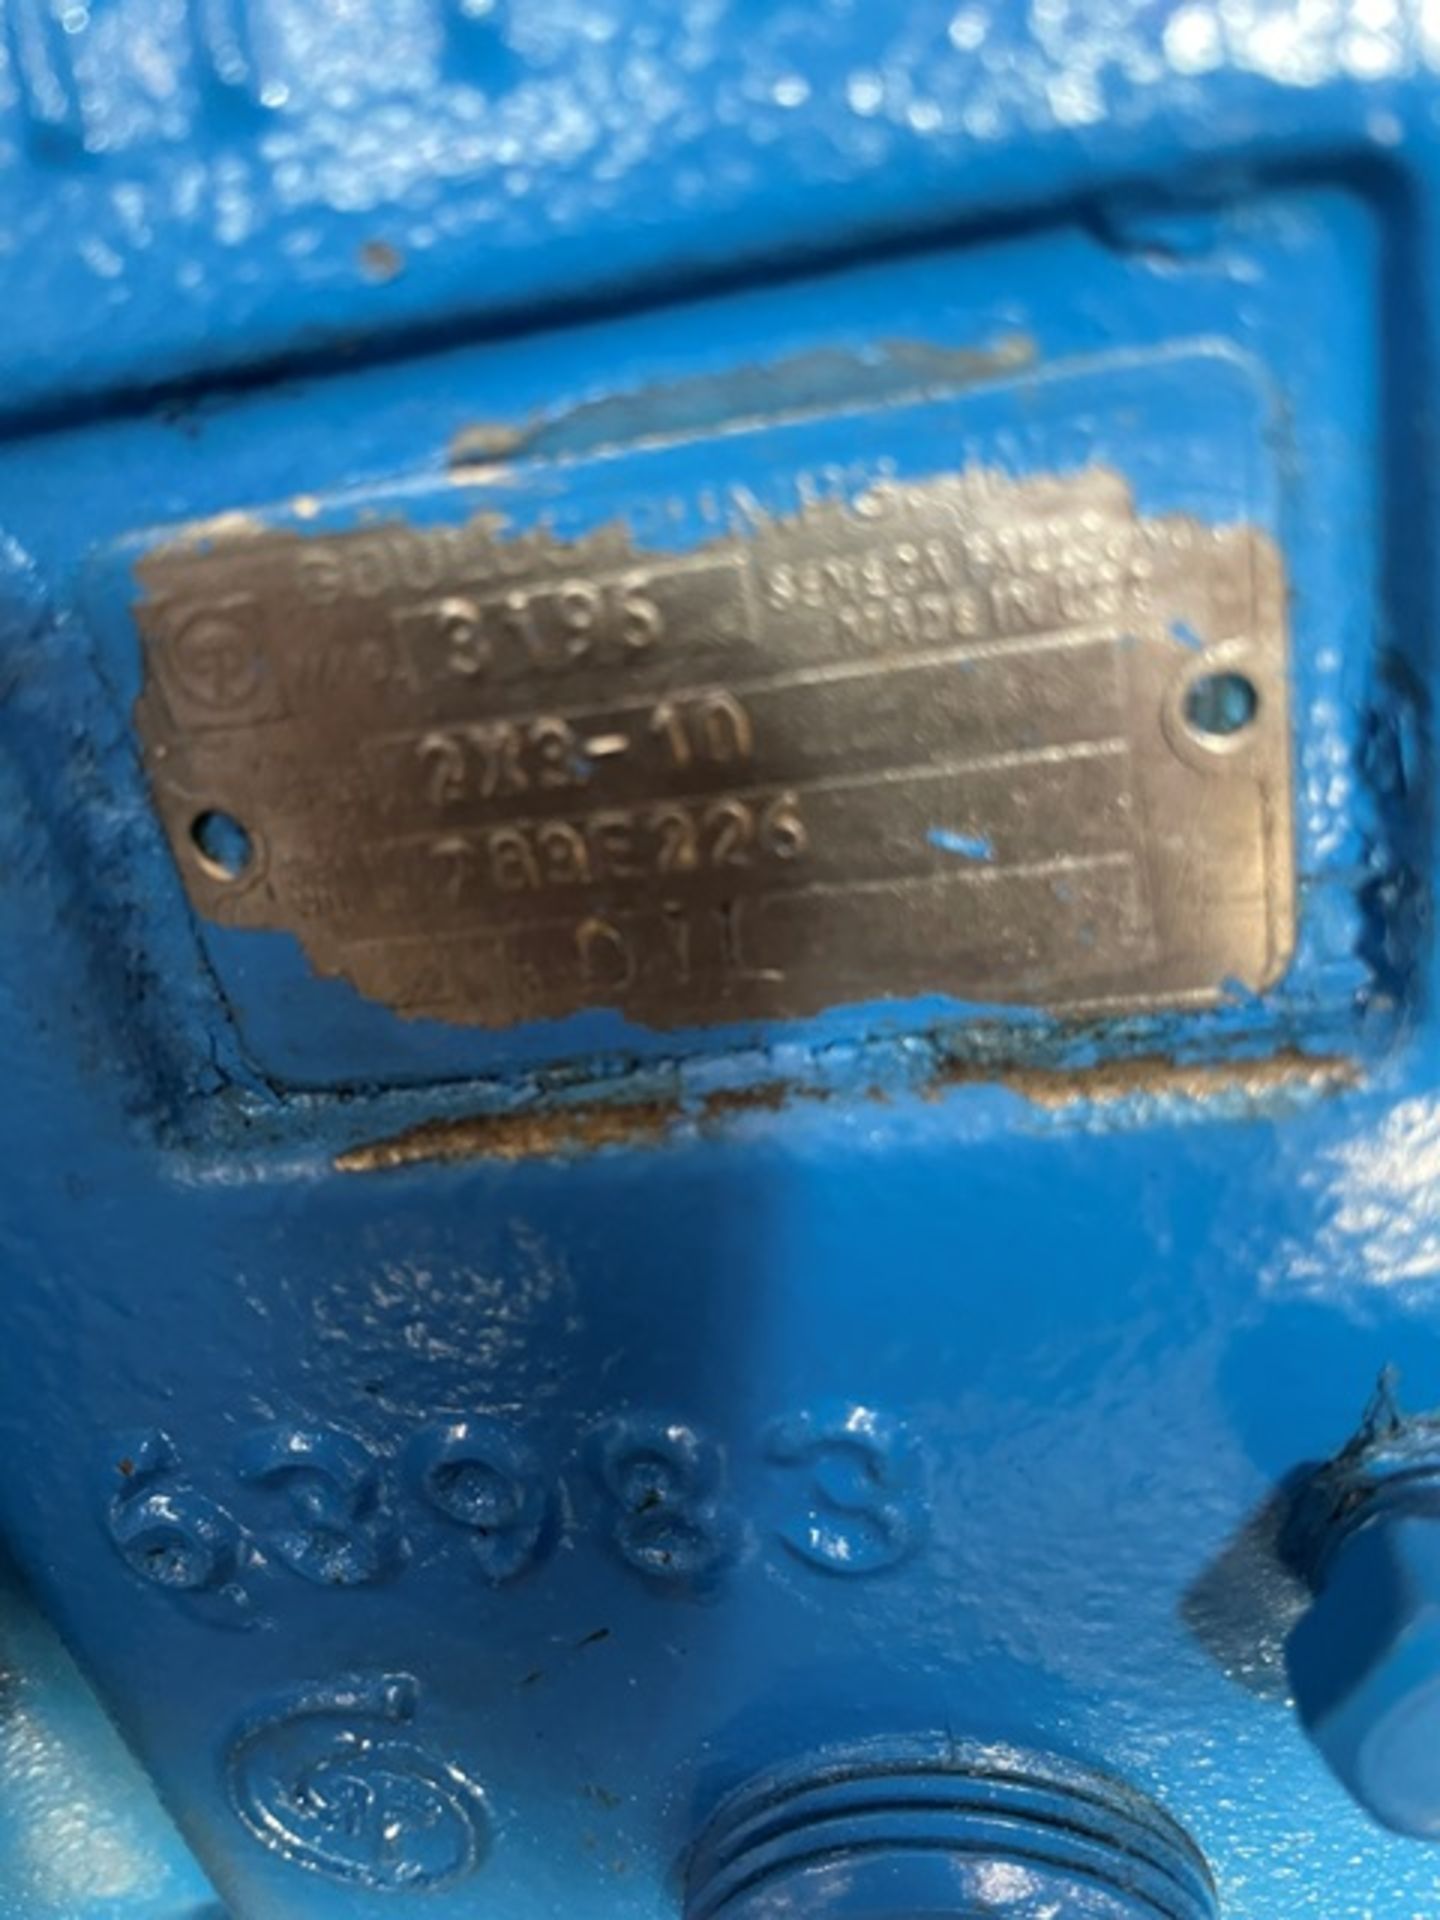 Goulds Model #MTX-3196 Pump, 2 x 3 x 10, Rigging & Loading Fee: $125 - Image 2 of 2